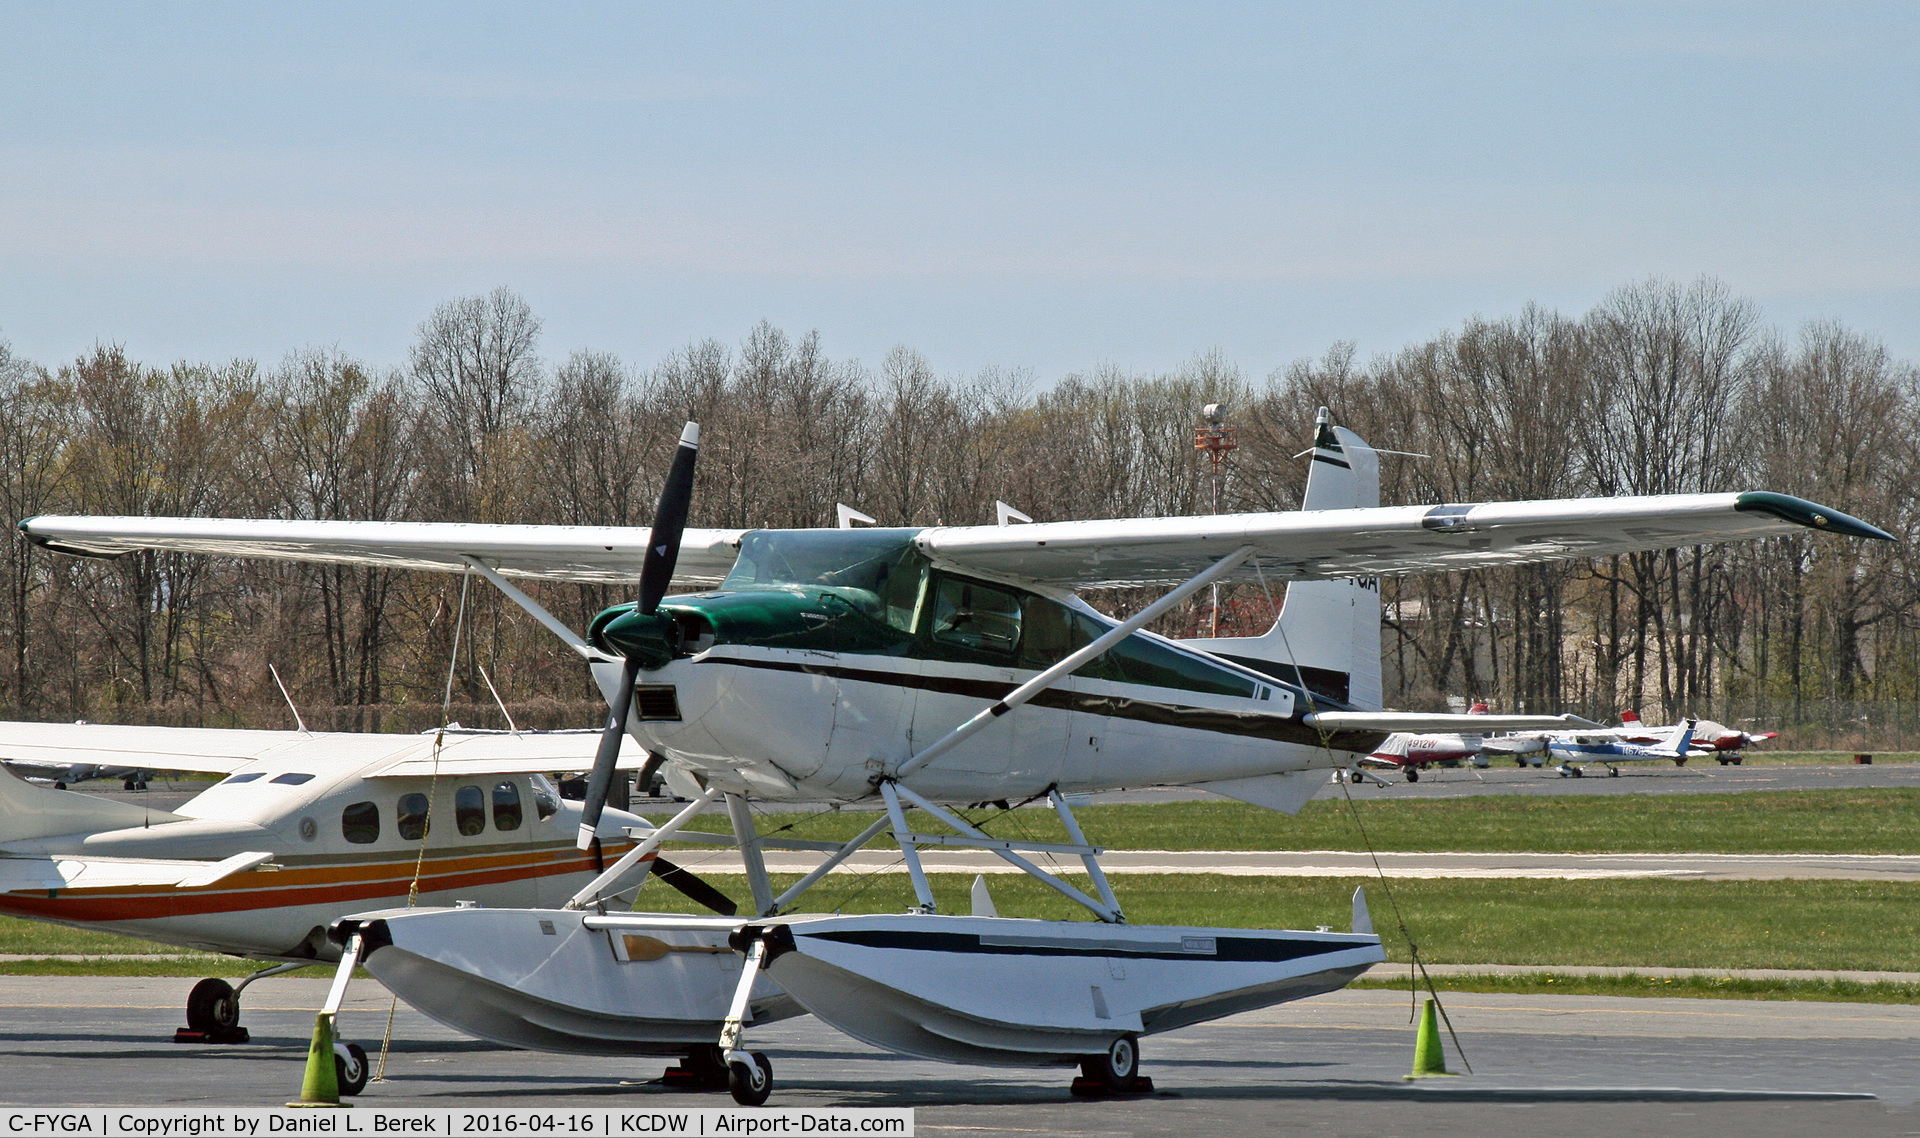 C-FYGA, 1969 Cessna 180H Skywagon C/N 18052001, Seeing this Canadian-registered floatplane was a very nice surprise!